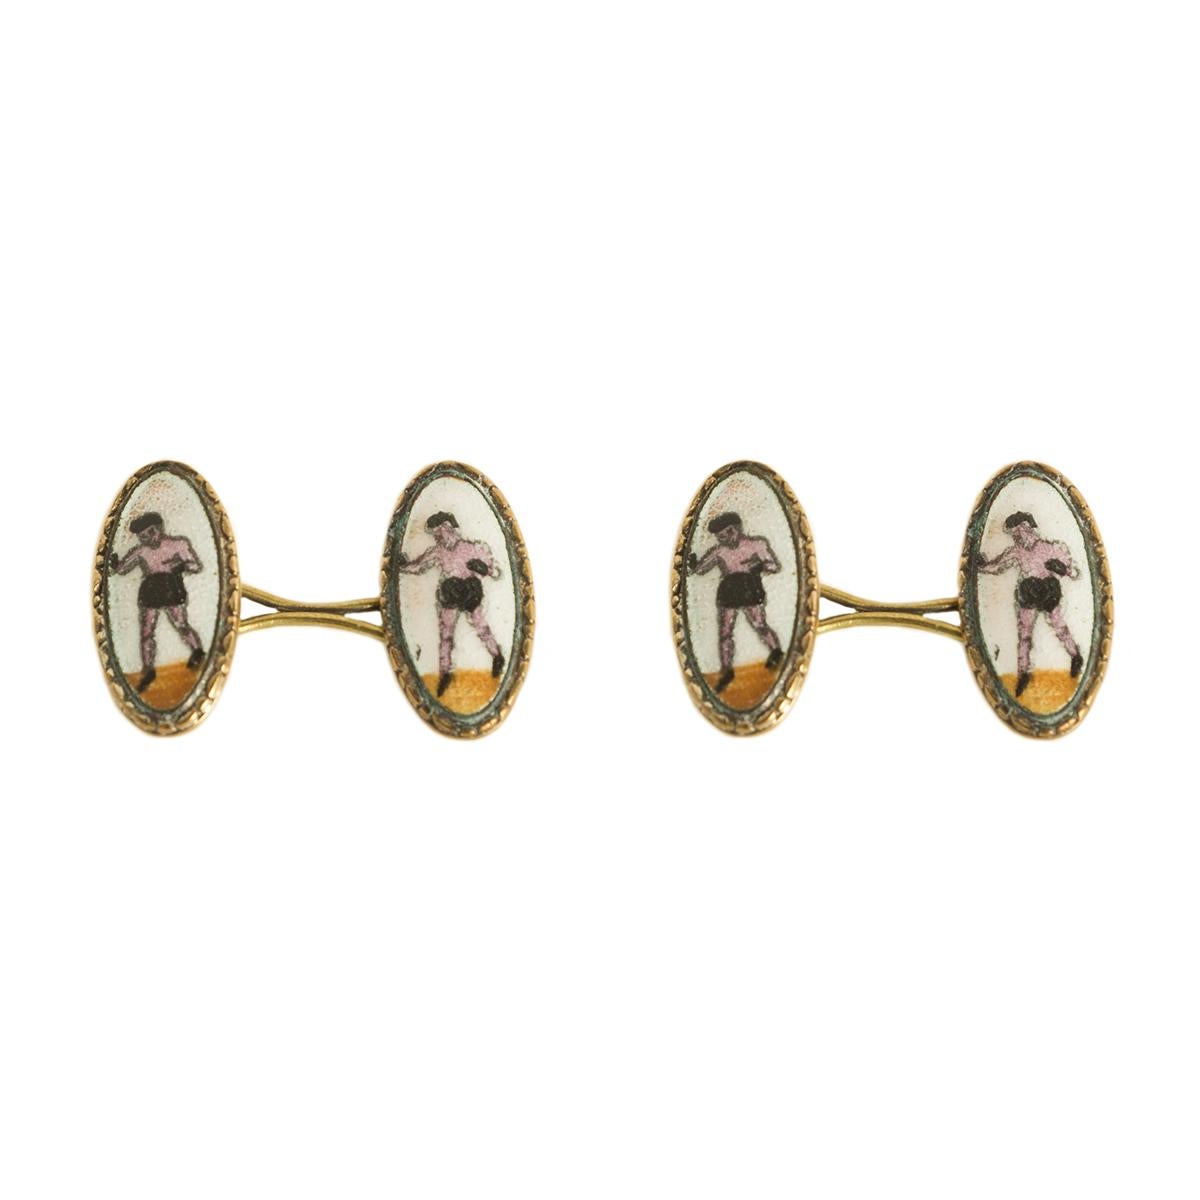 1930s brass and enamel cufflinks. Double cufflinks depicting boxers, special pattern and design. Elegant for any occasion, just a few elements are enough to outline a man of class. The first evidence of the use of cufflinks dates back to the